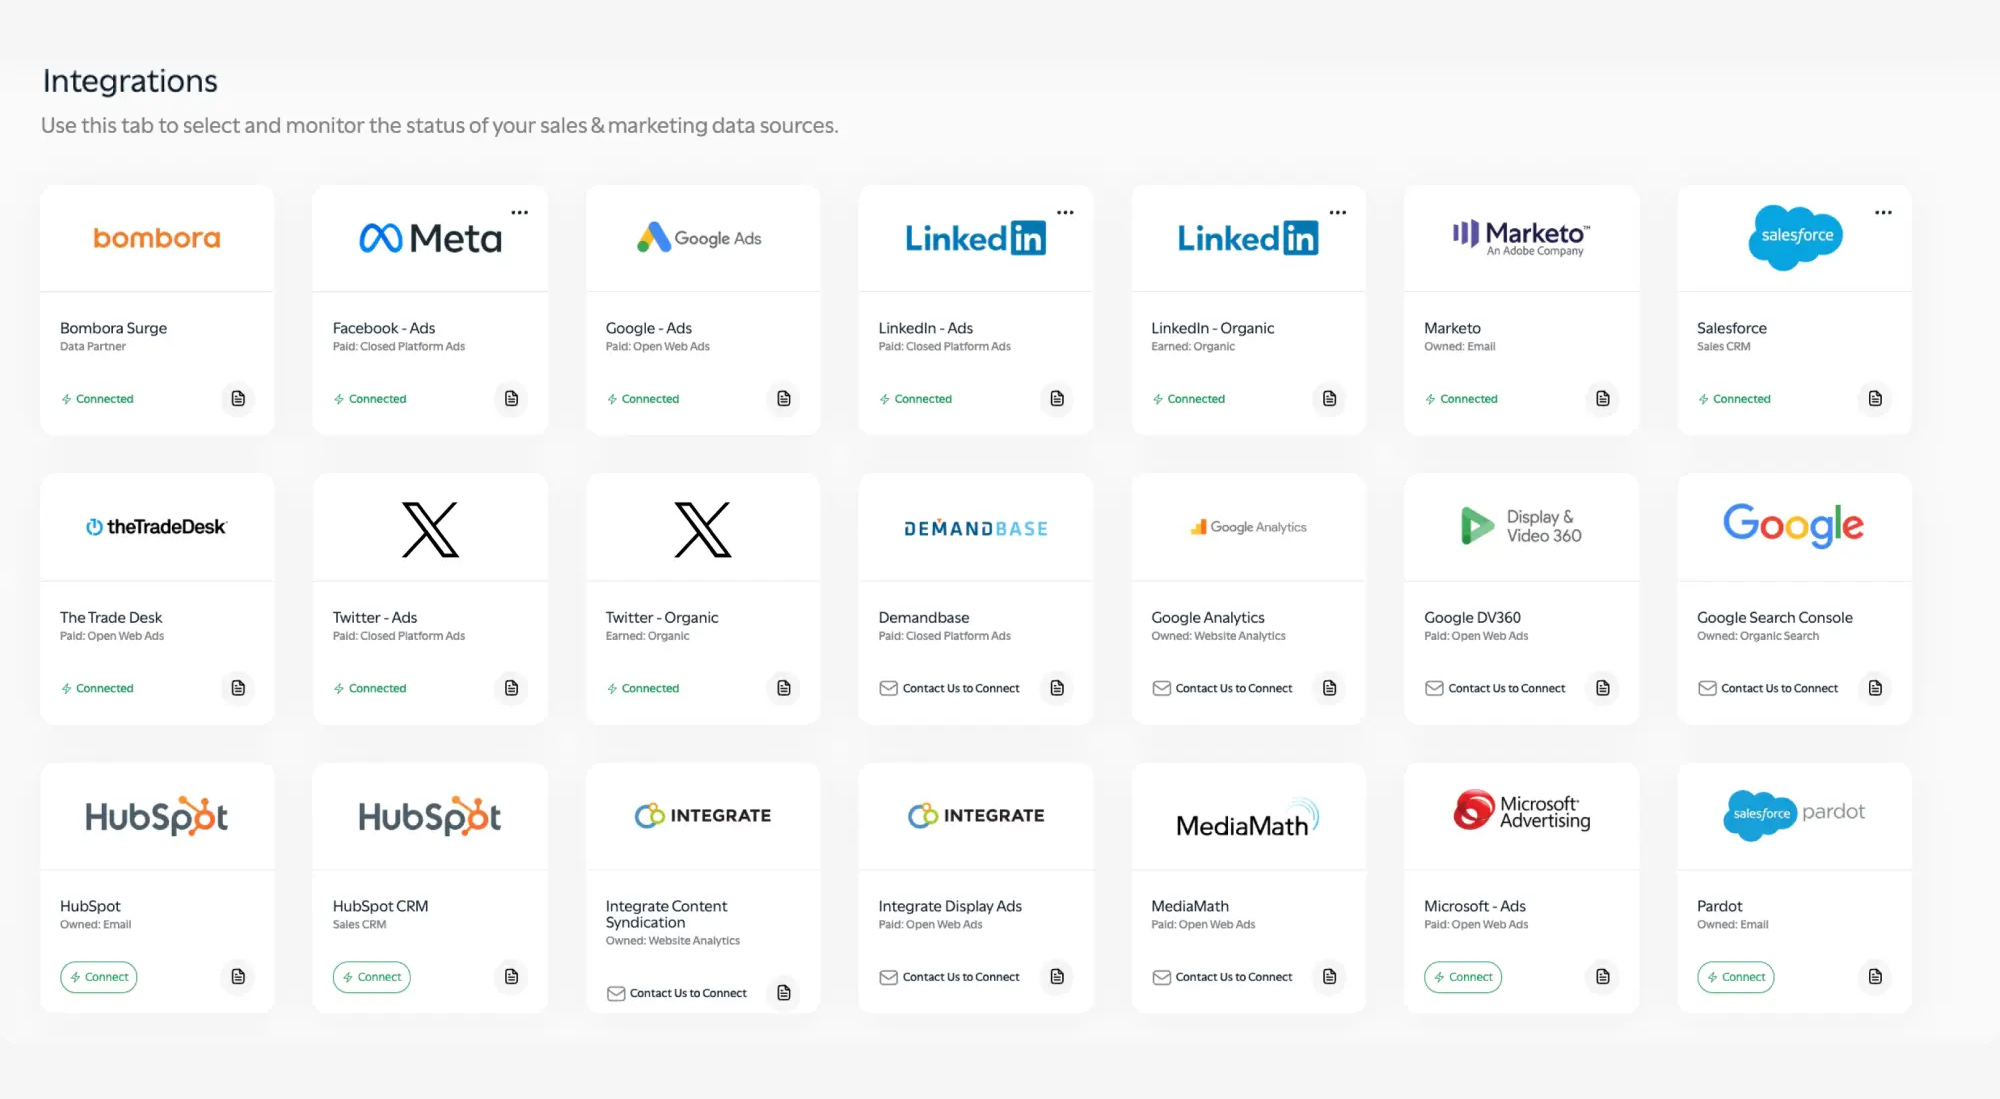 Integrate your sales and marketing stack in minutes, not months